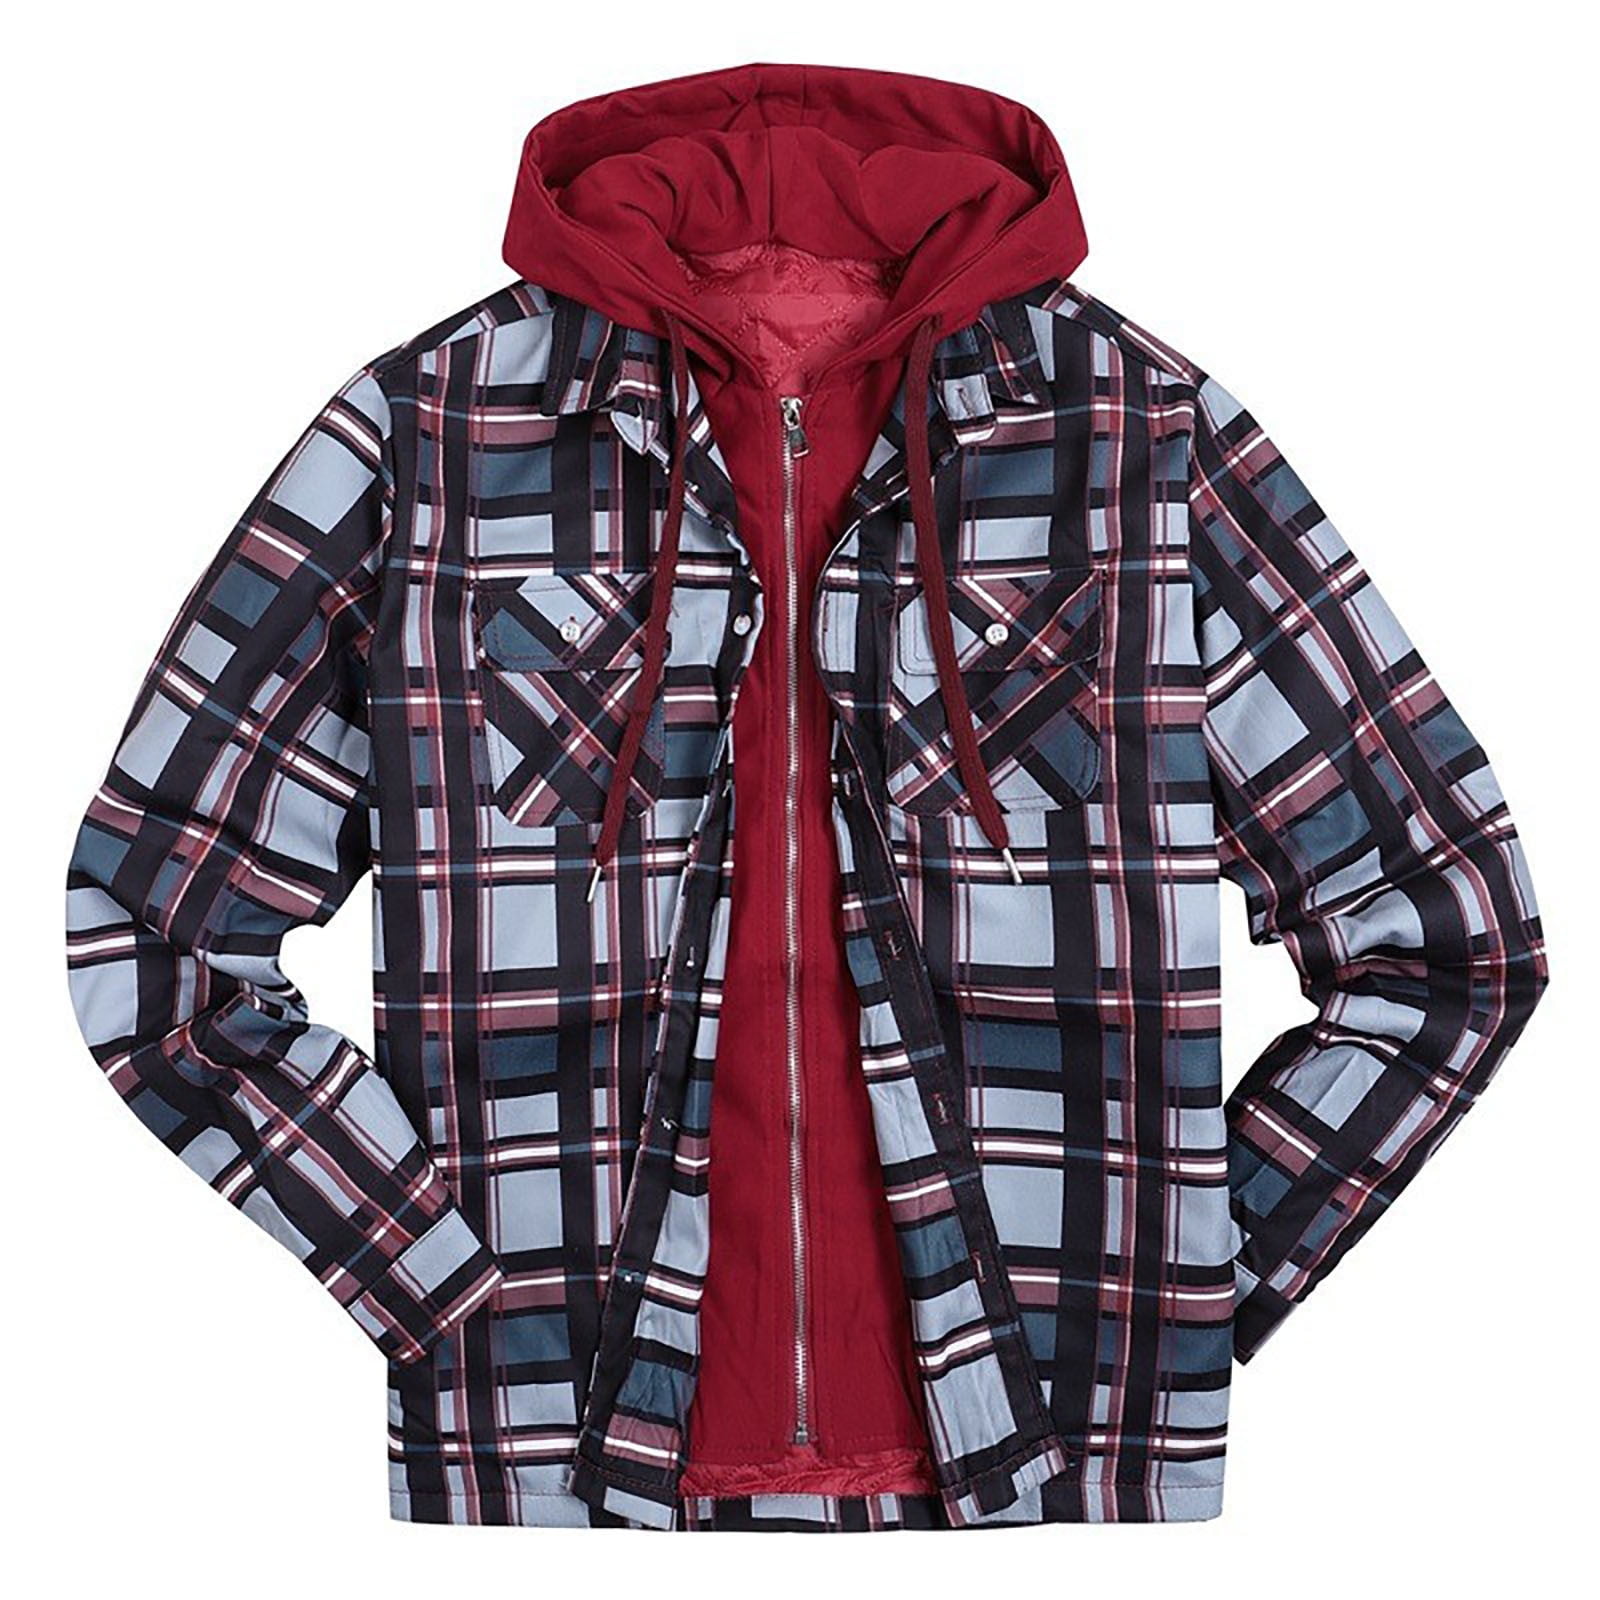 Hooded Plaid Shirts for Men Long Sleeve Padded Zipper Hoodies Flannel ...